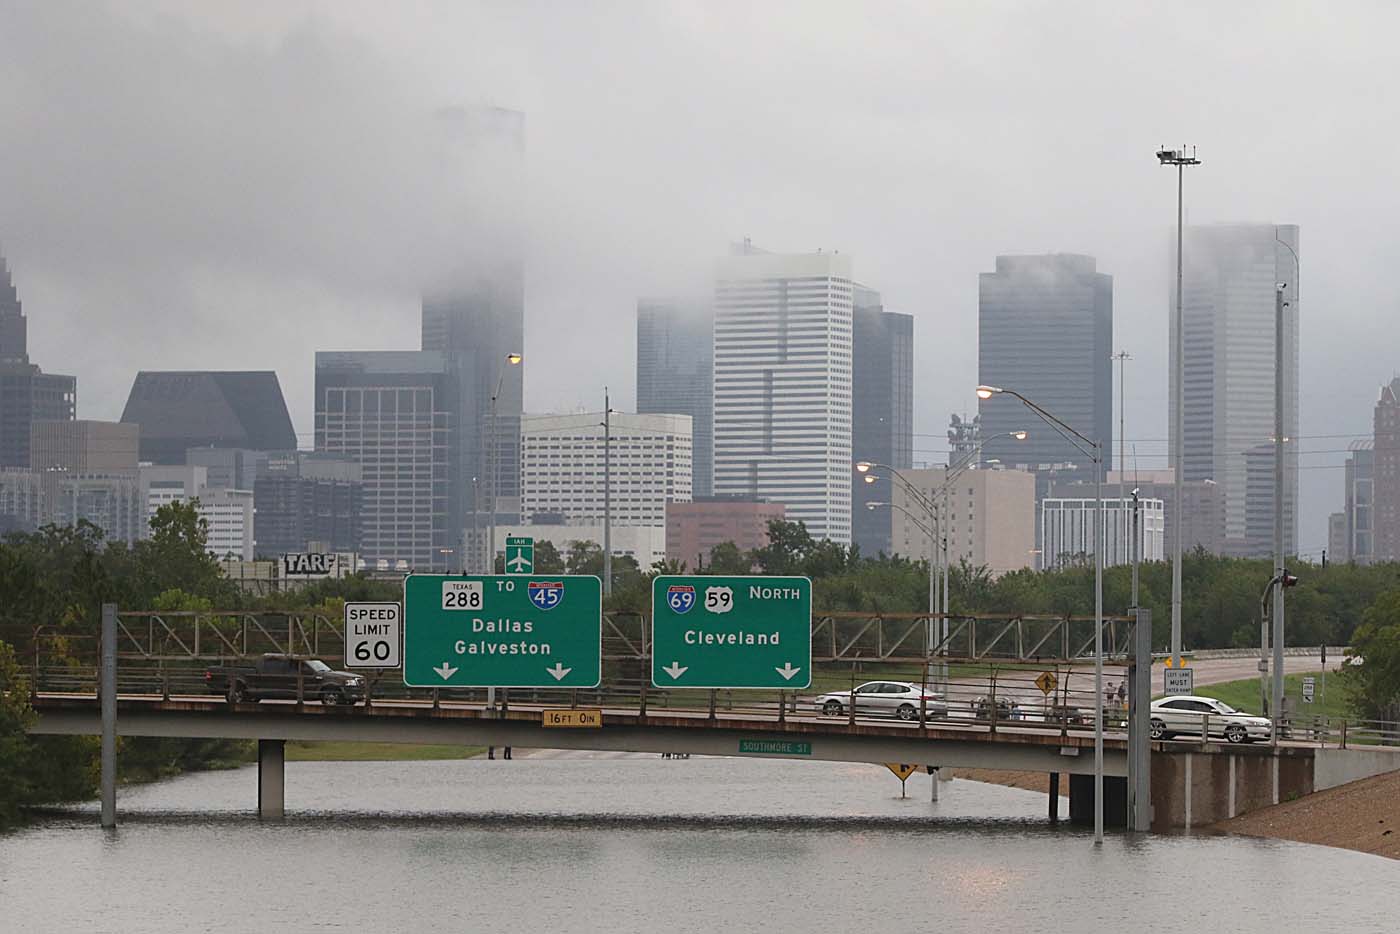 Downtown Houston and submerged highways are seen August 27, 2017 as the city battles with tropical storm Harvey and resulting floods. / AFP PHOTO / Thomas B. Shea